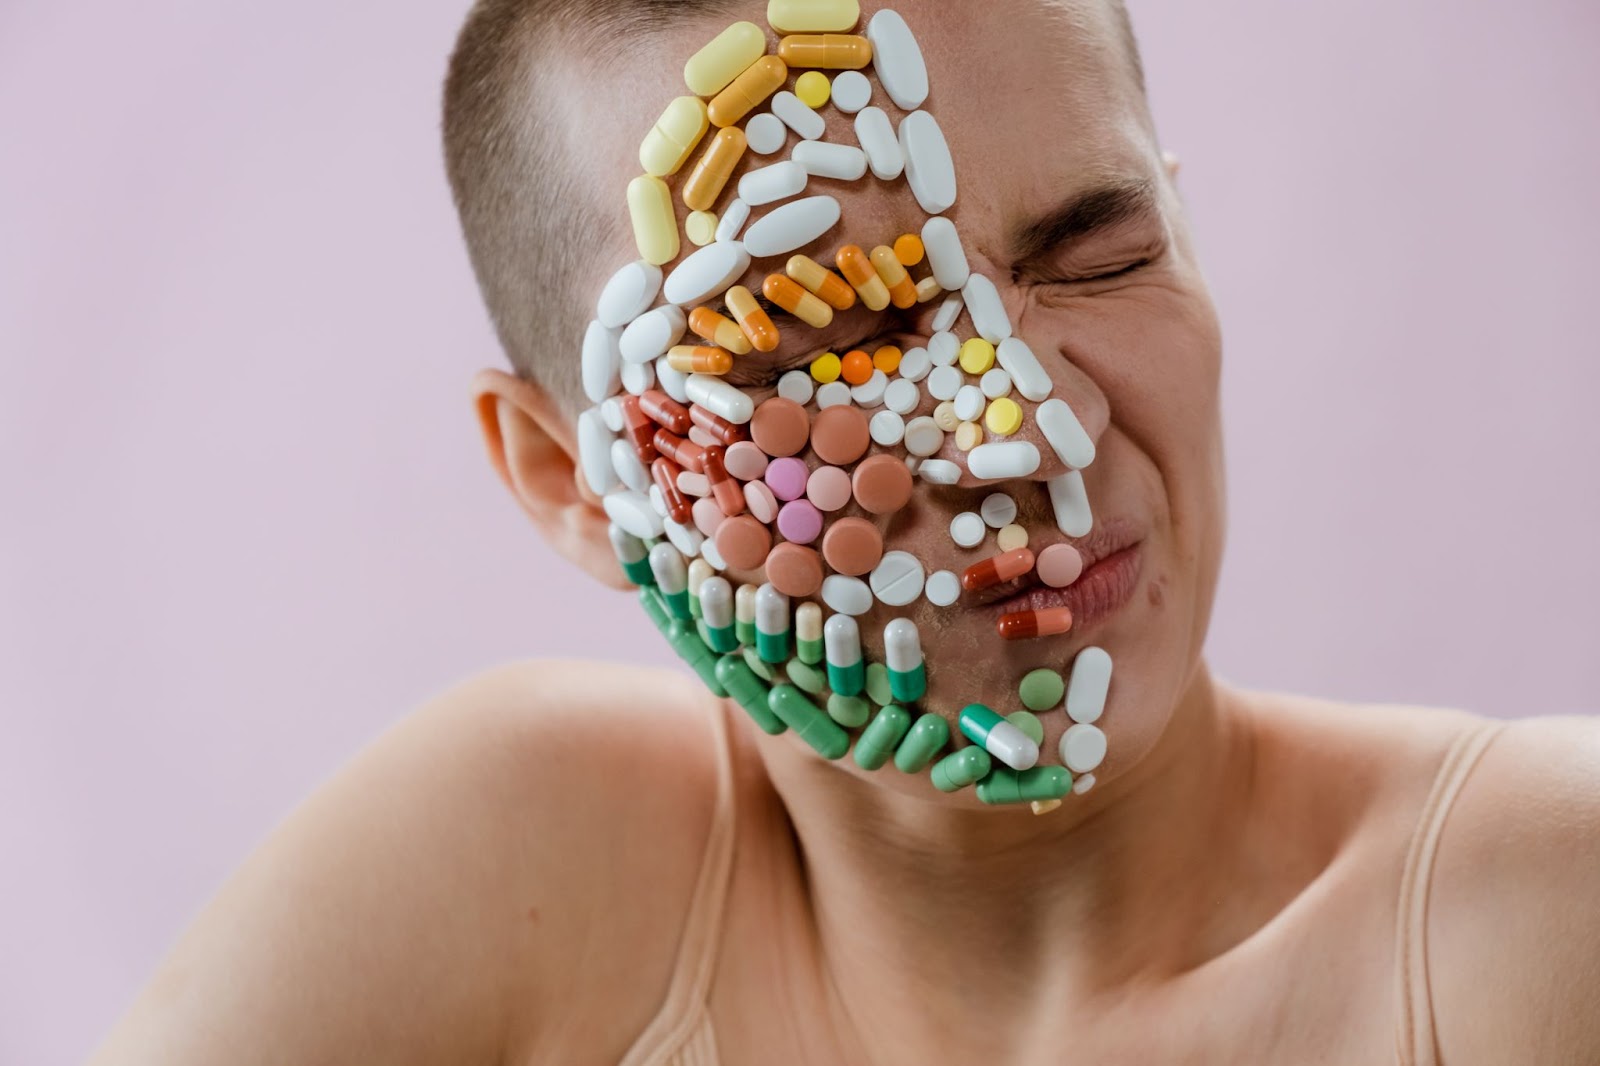 Tapentadol Overdose: Signs and Symptoms